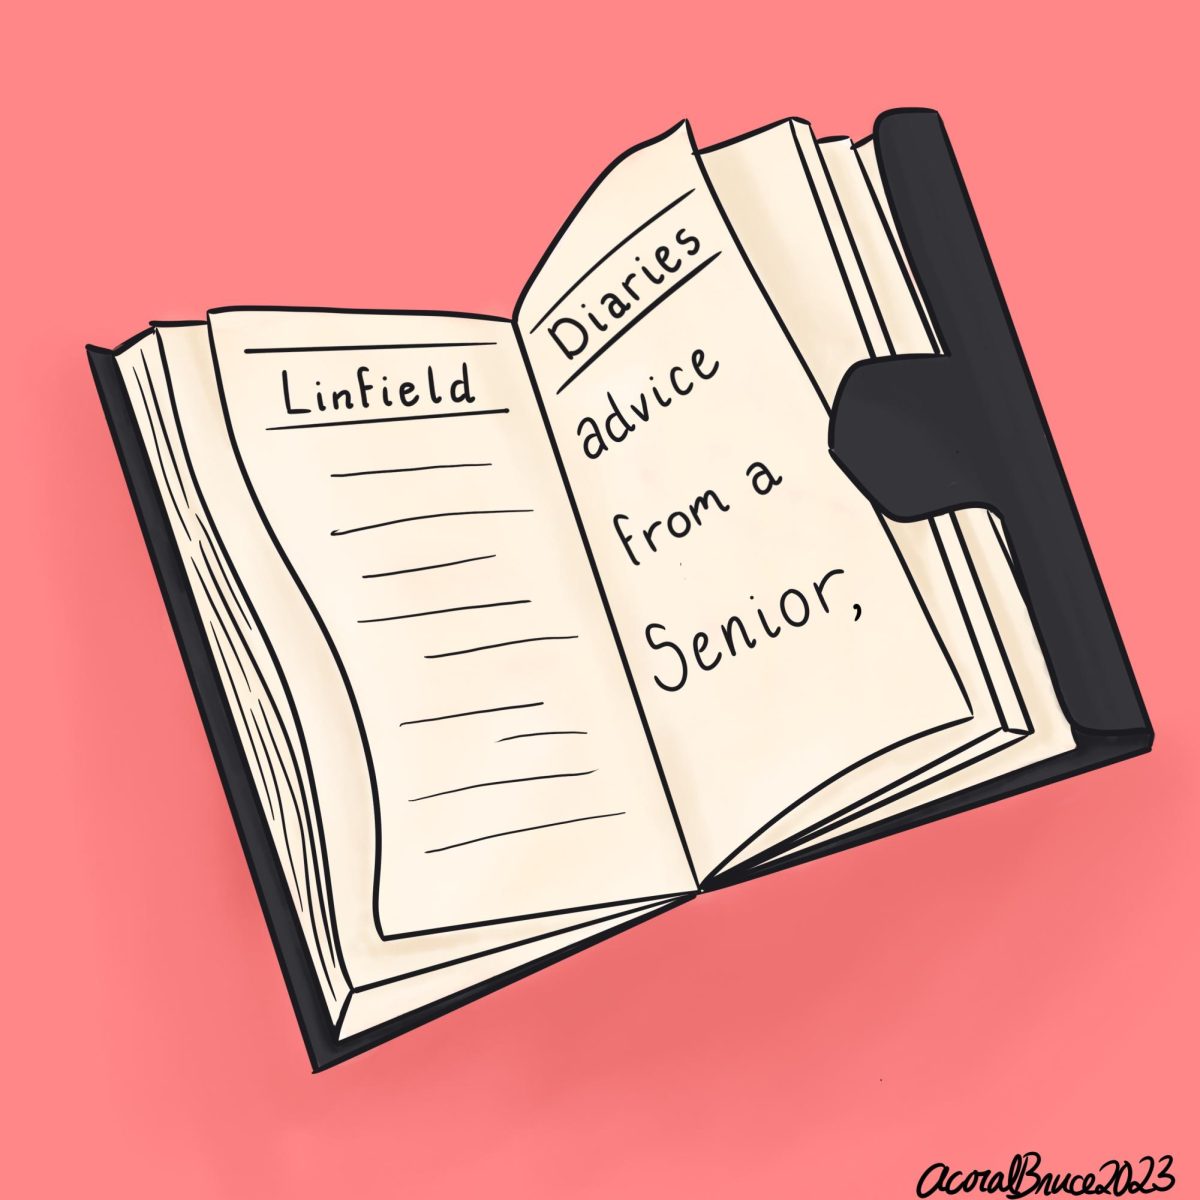 The Linfield Diaries: A freshman’s guide to the do’s and donts at Linfield University